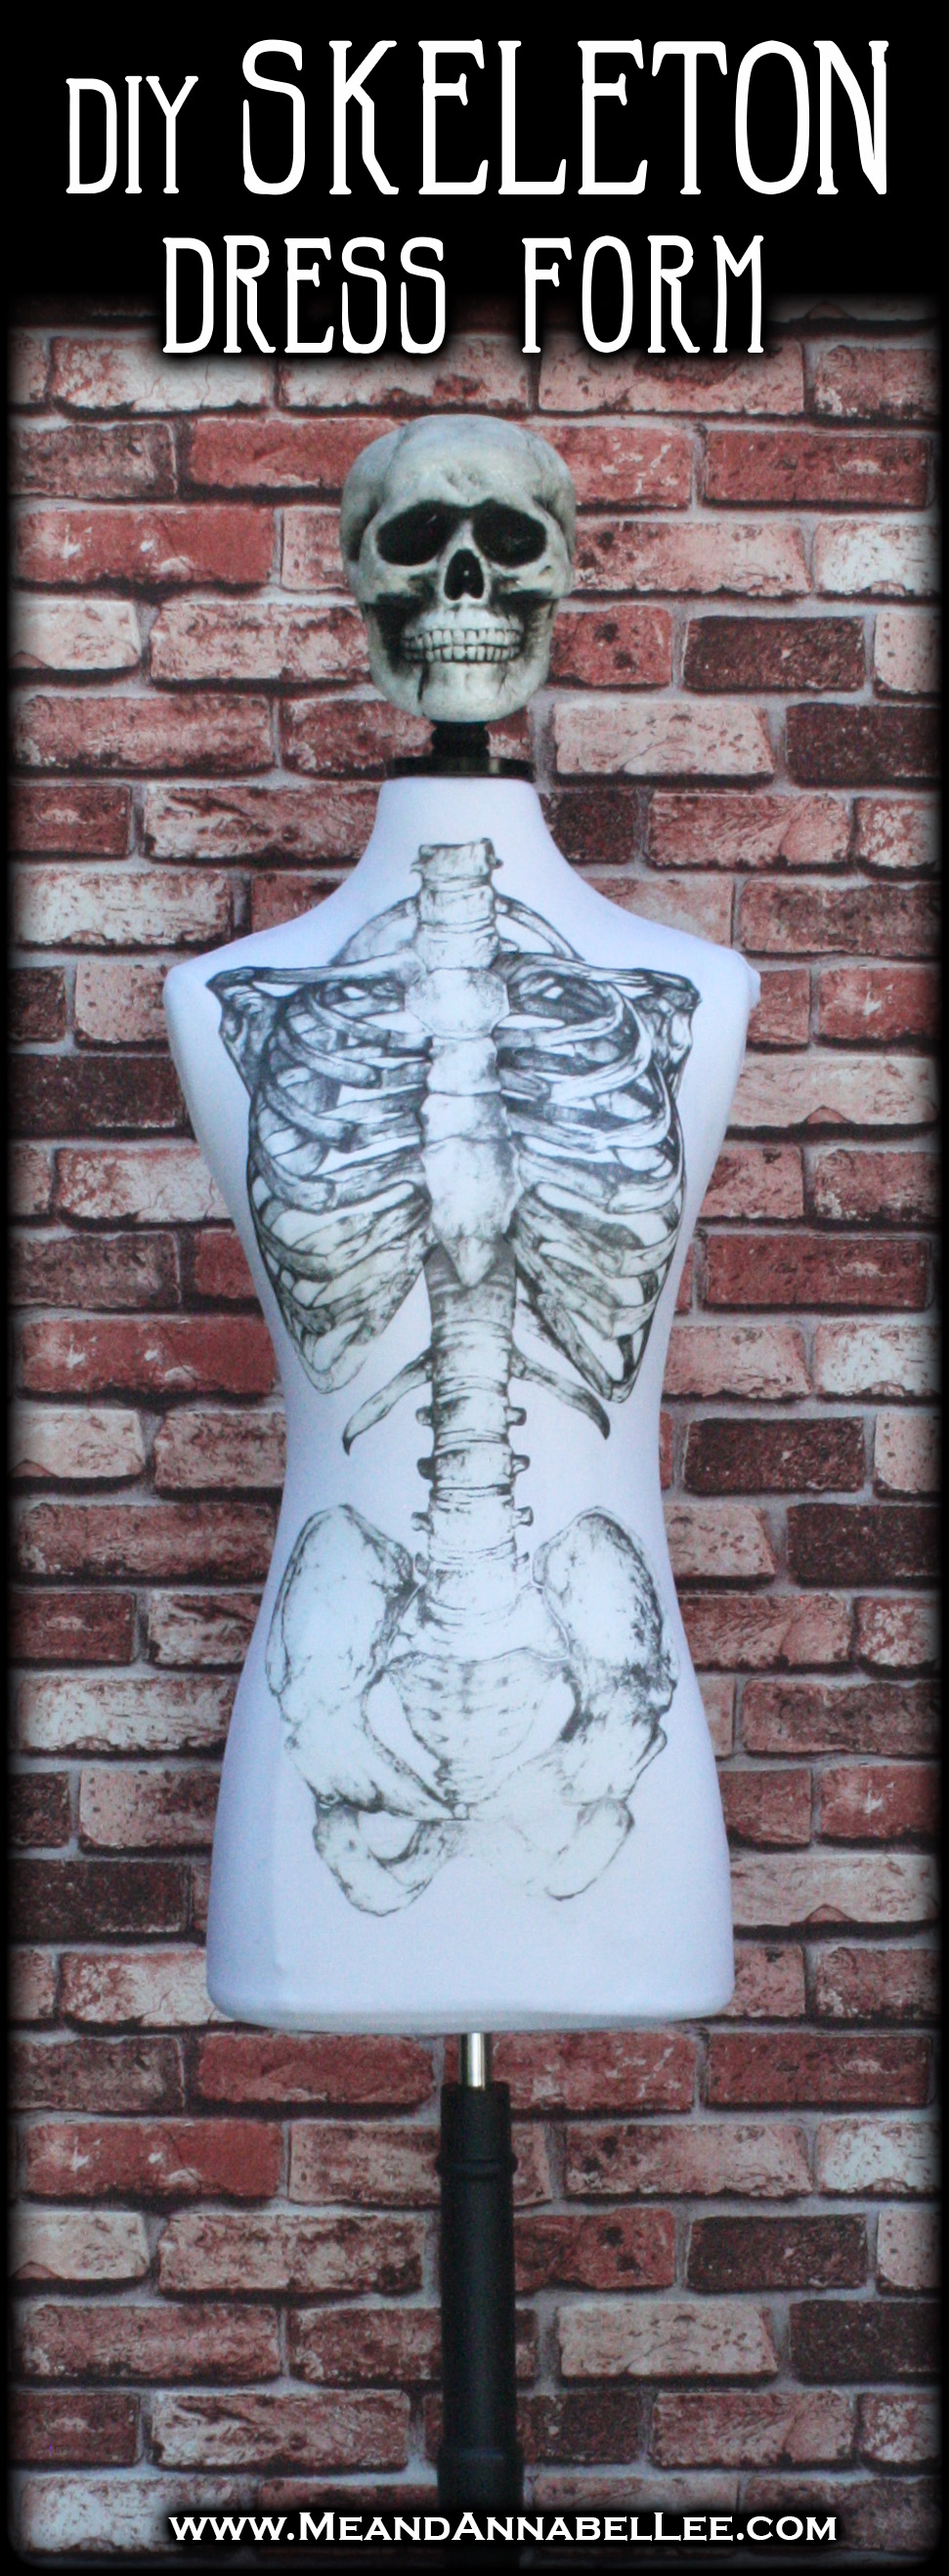 DIY Skeleton Dress Form Display Mannequin | Ribcage Iron on Transfer | Removable Skeletal Slip Cover | Gothic DIY | Halloween Prop |Goth it Yourself | www.MeandAnnabelLee.com